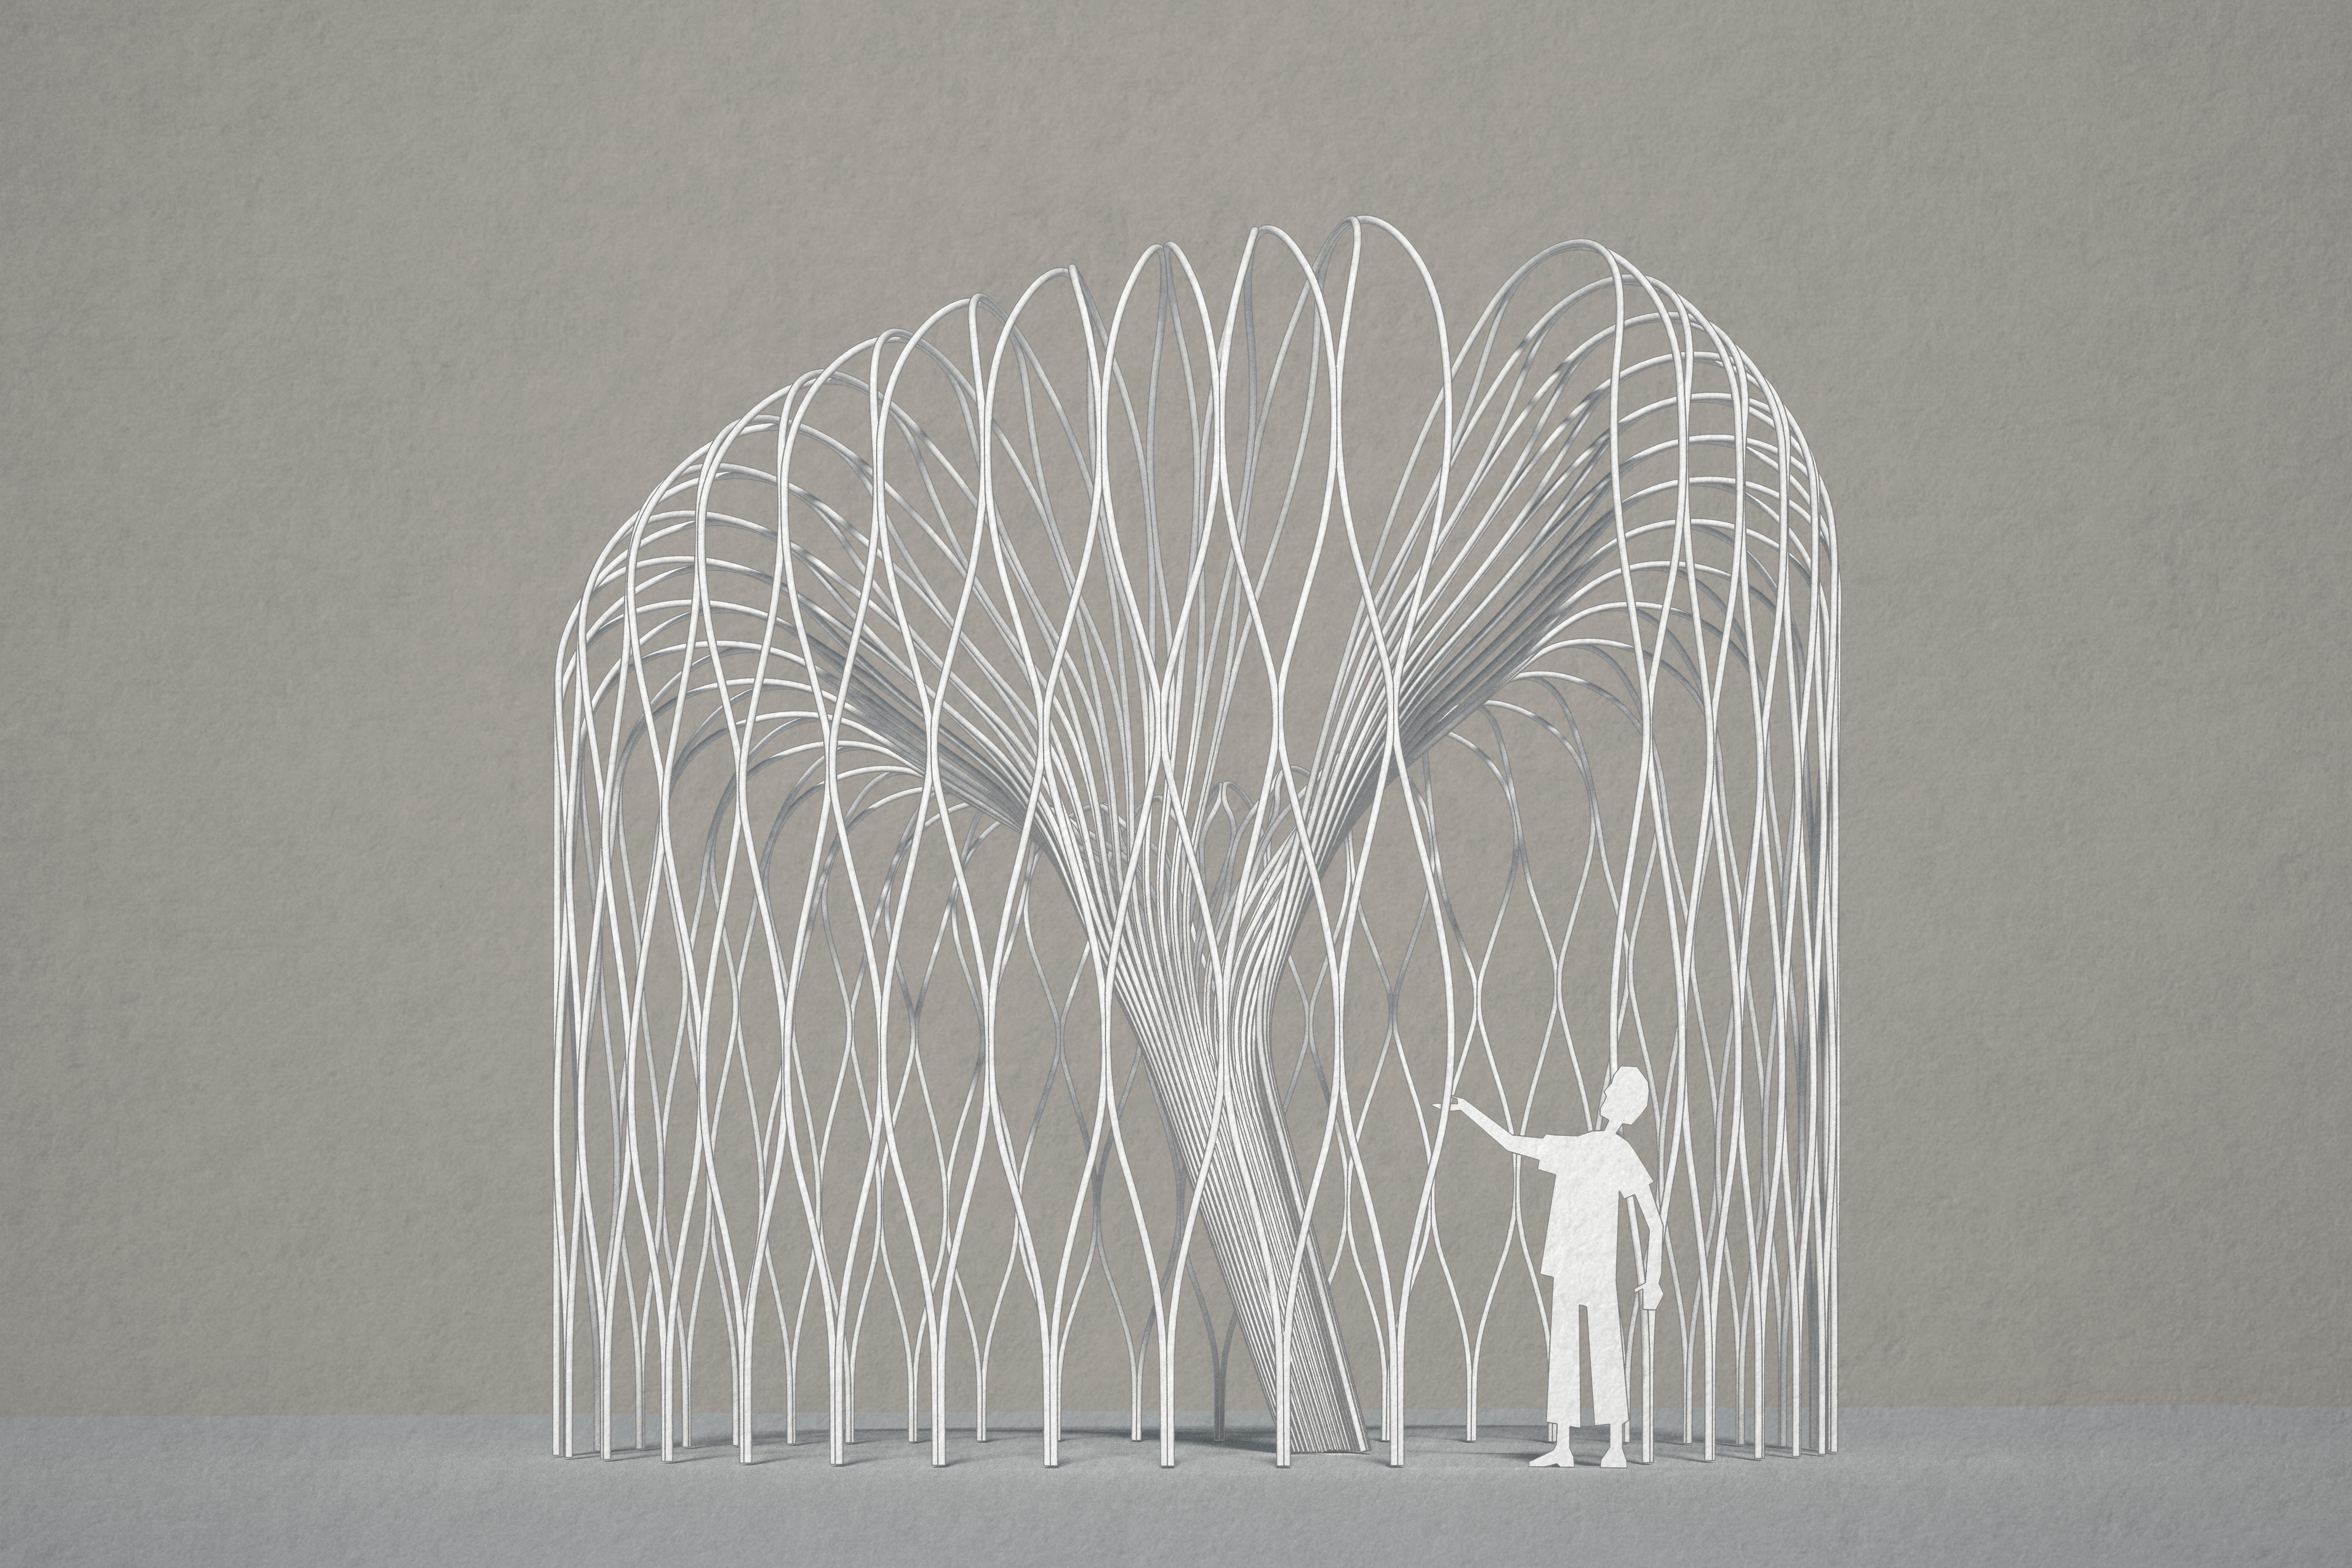 Sketch of stainless steel Covid Memorial willow tree sculpture